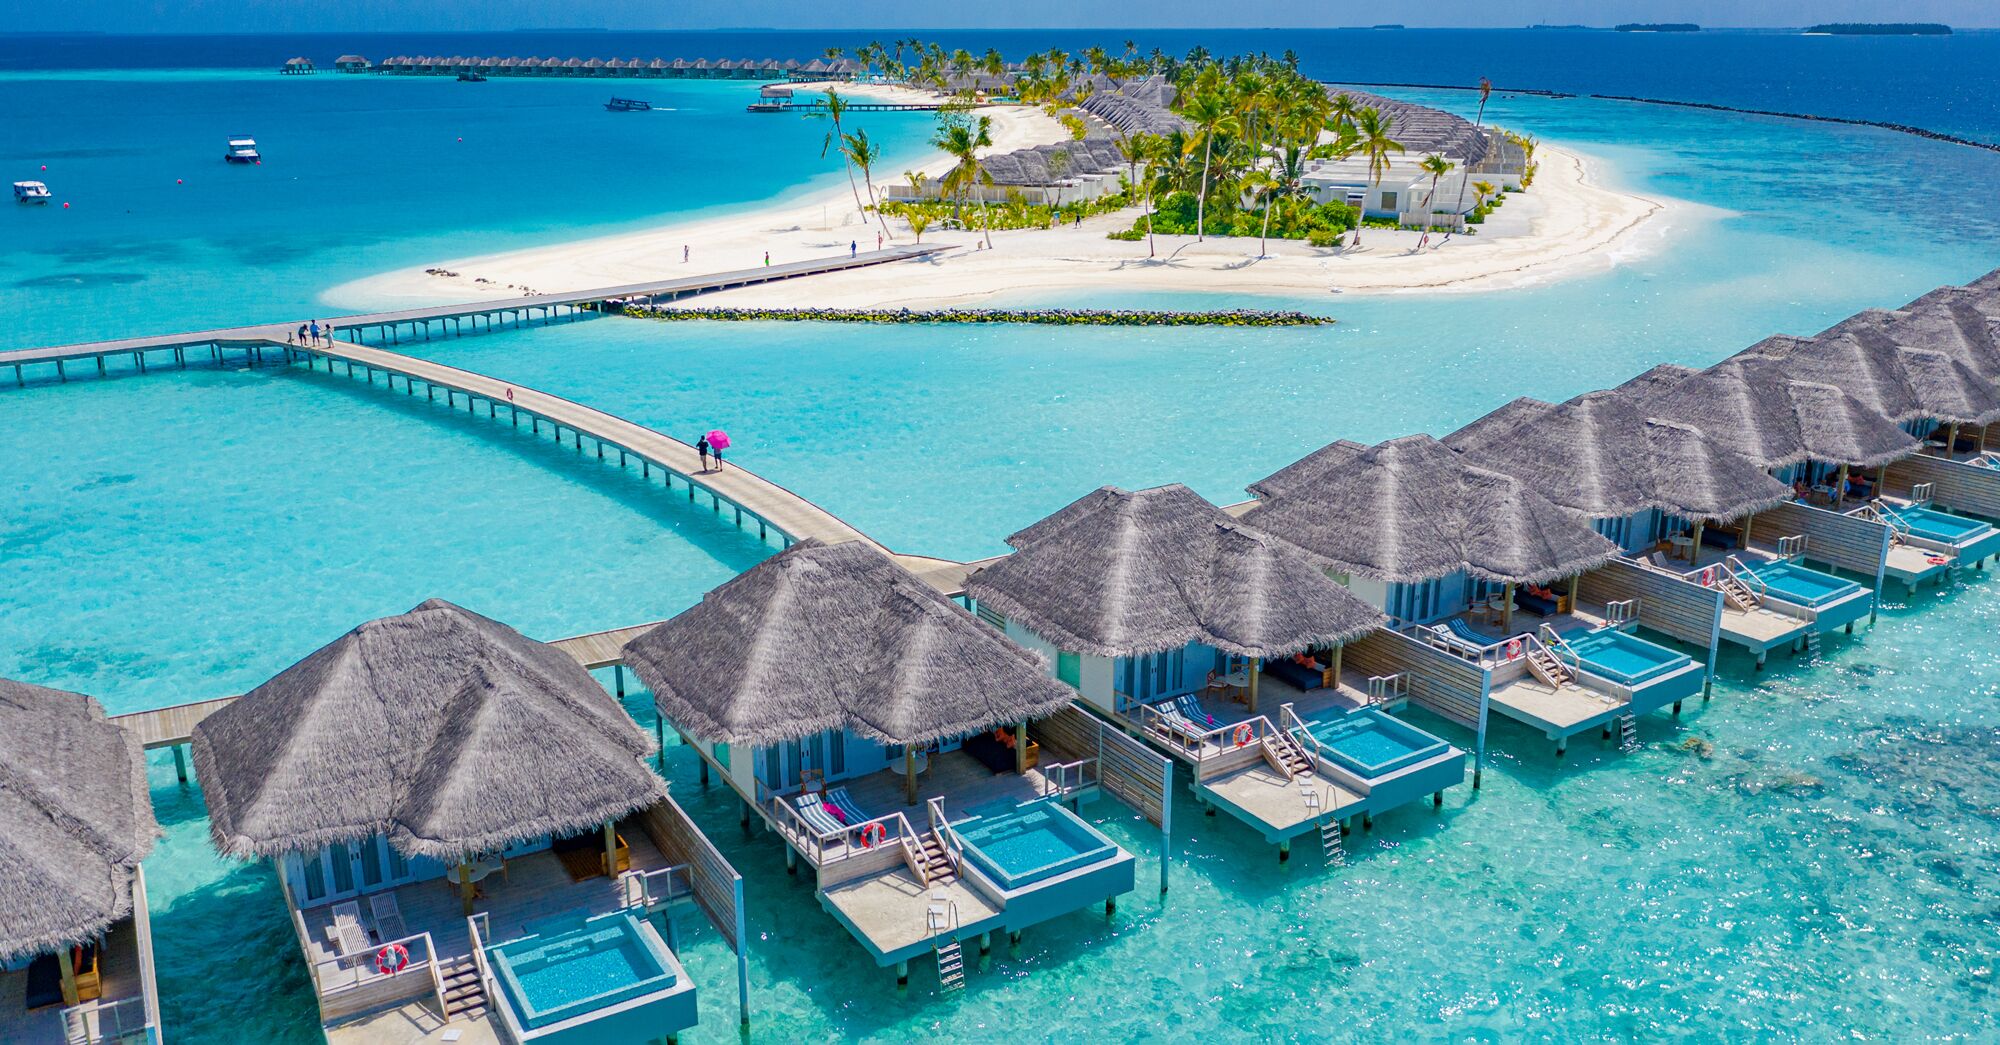 The Complete Guide to a Maldives Honeymoon